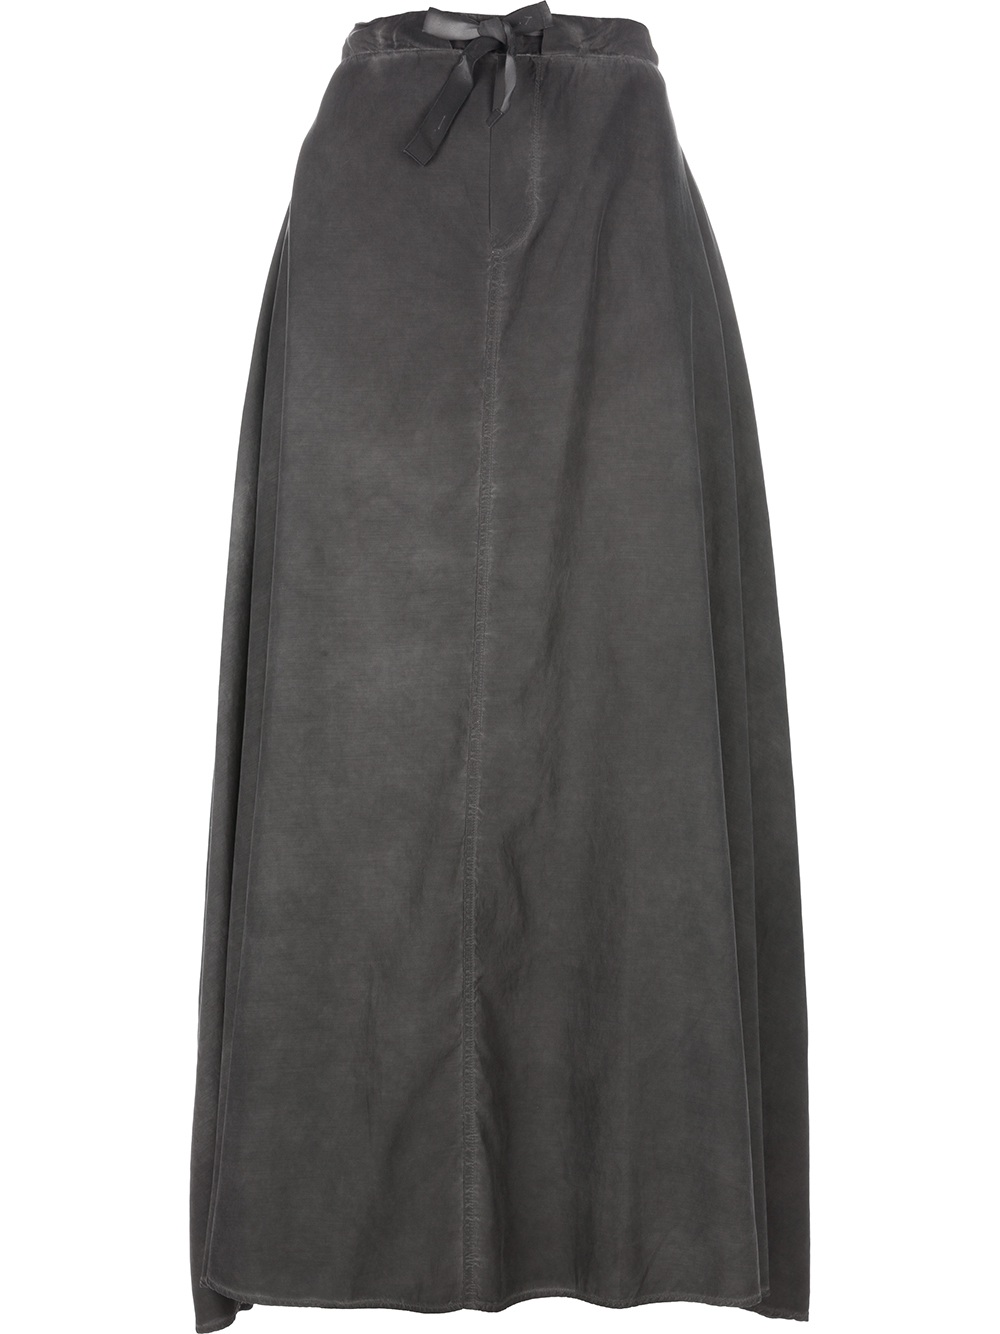 Mm6 by maison martin margiela A Line Maxi Skirt in Gray | Lyst